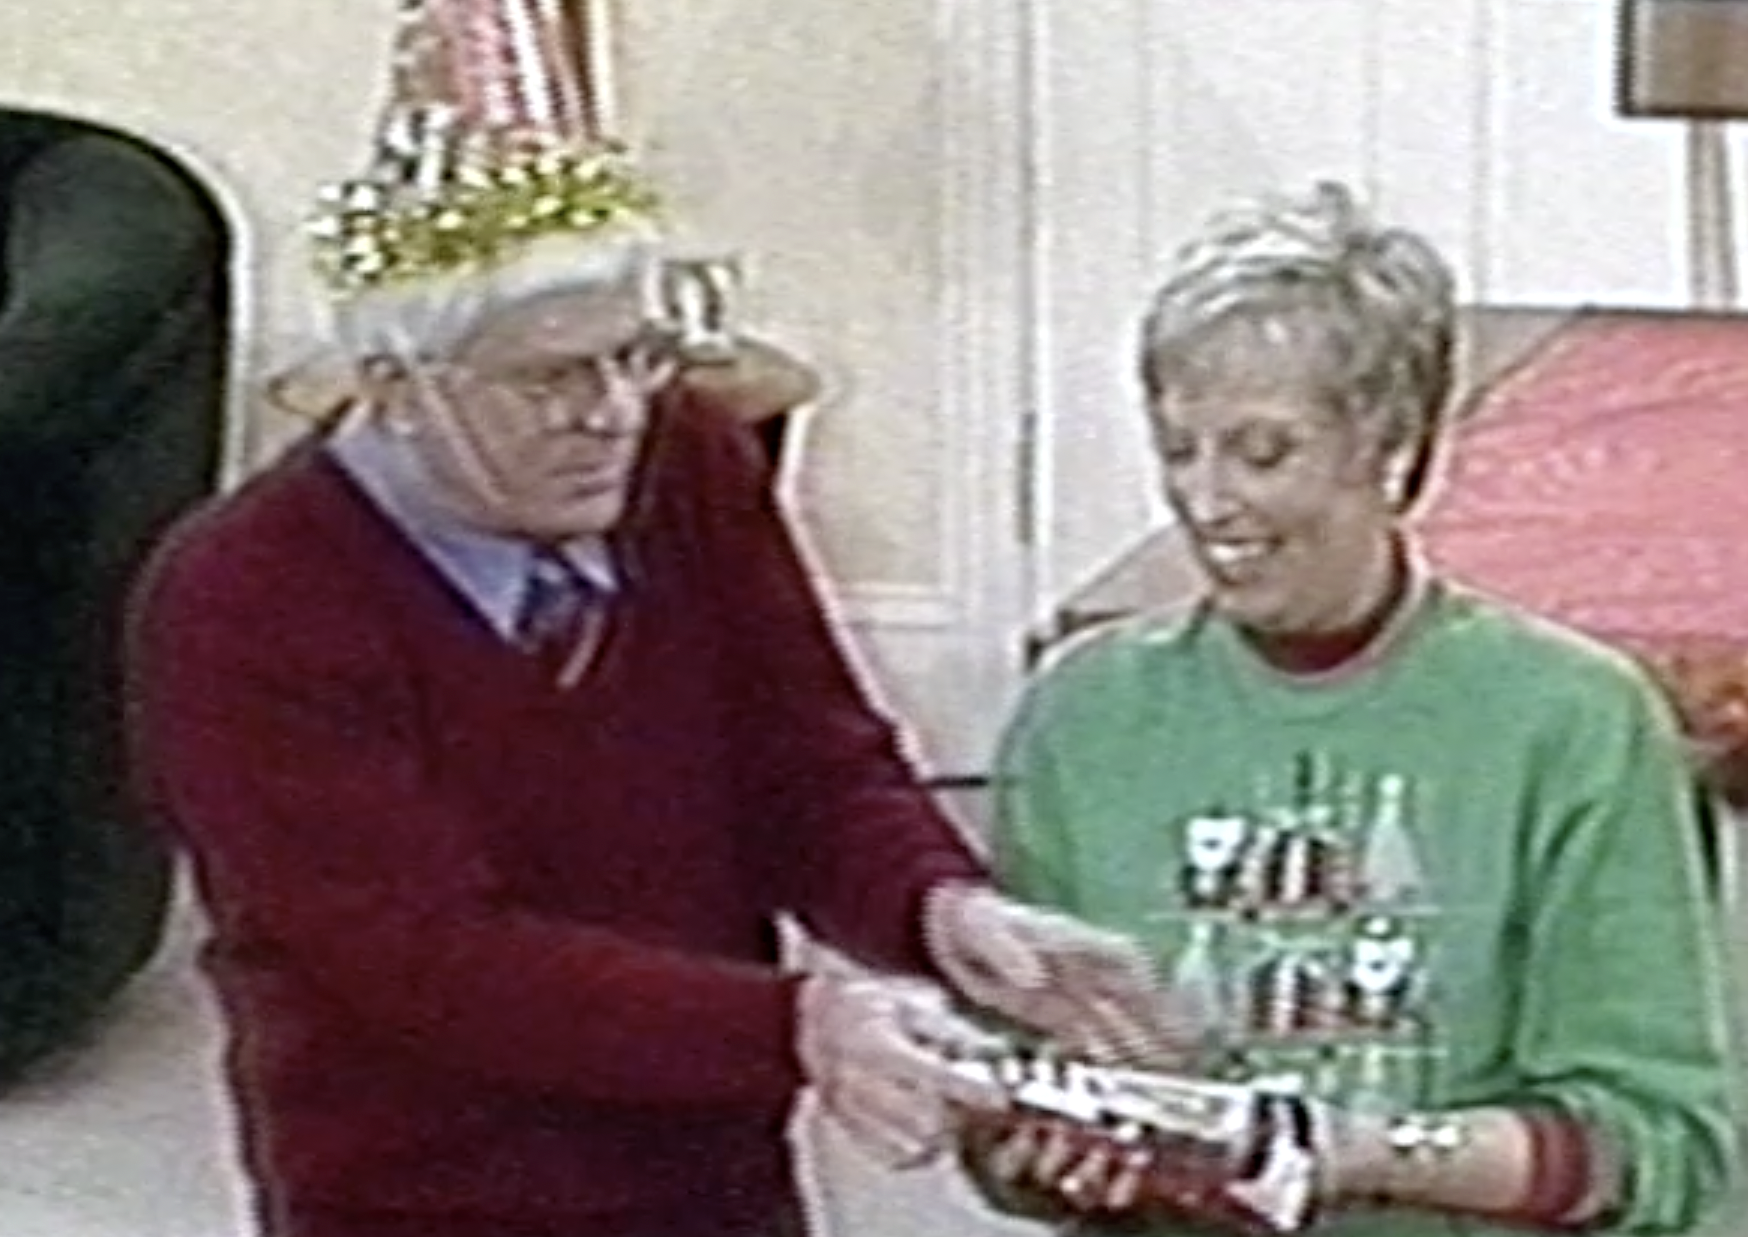 Marie shares ideas from Pack-O-Fun magazine on the Phil Donahue Show